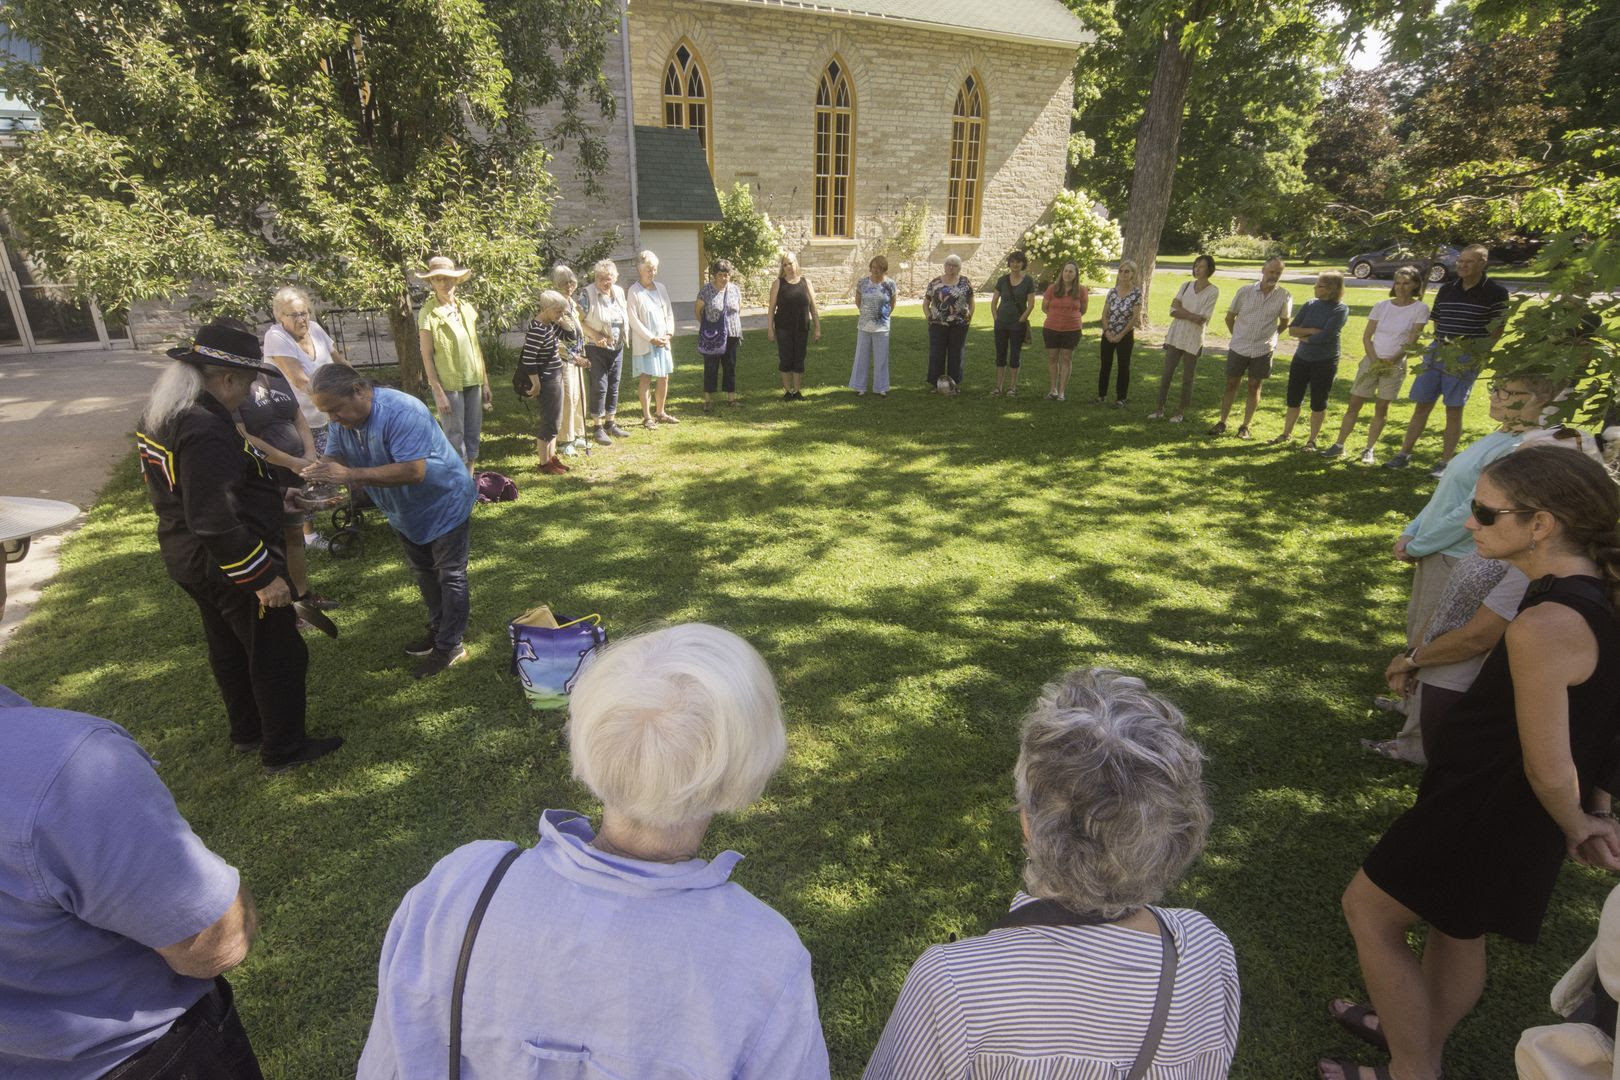 35 people attending a ceremony led by Elder Larry McDermott on the lawn of Almonte United Church, Ontario